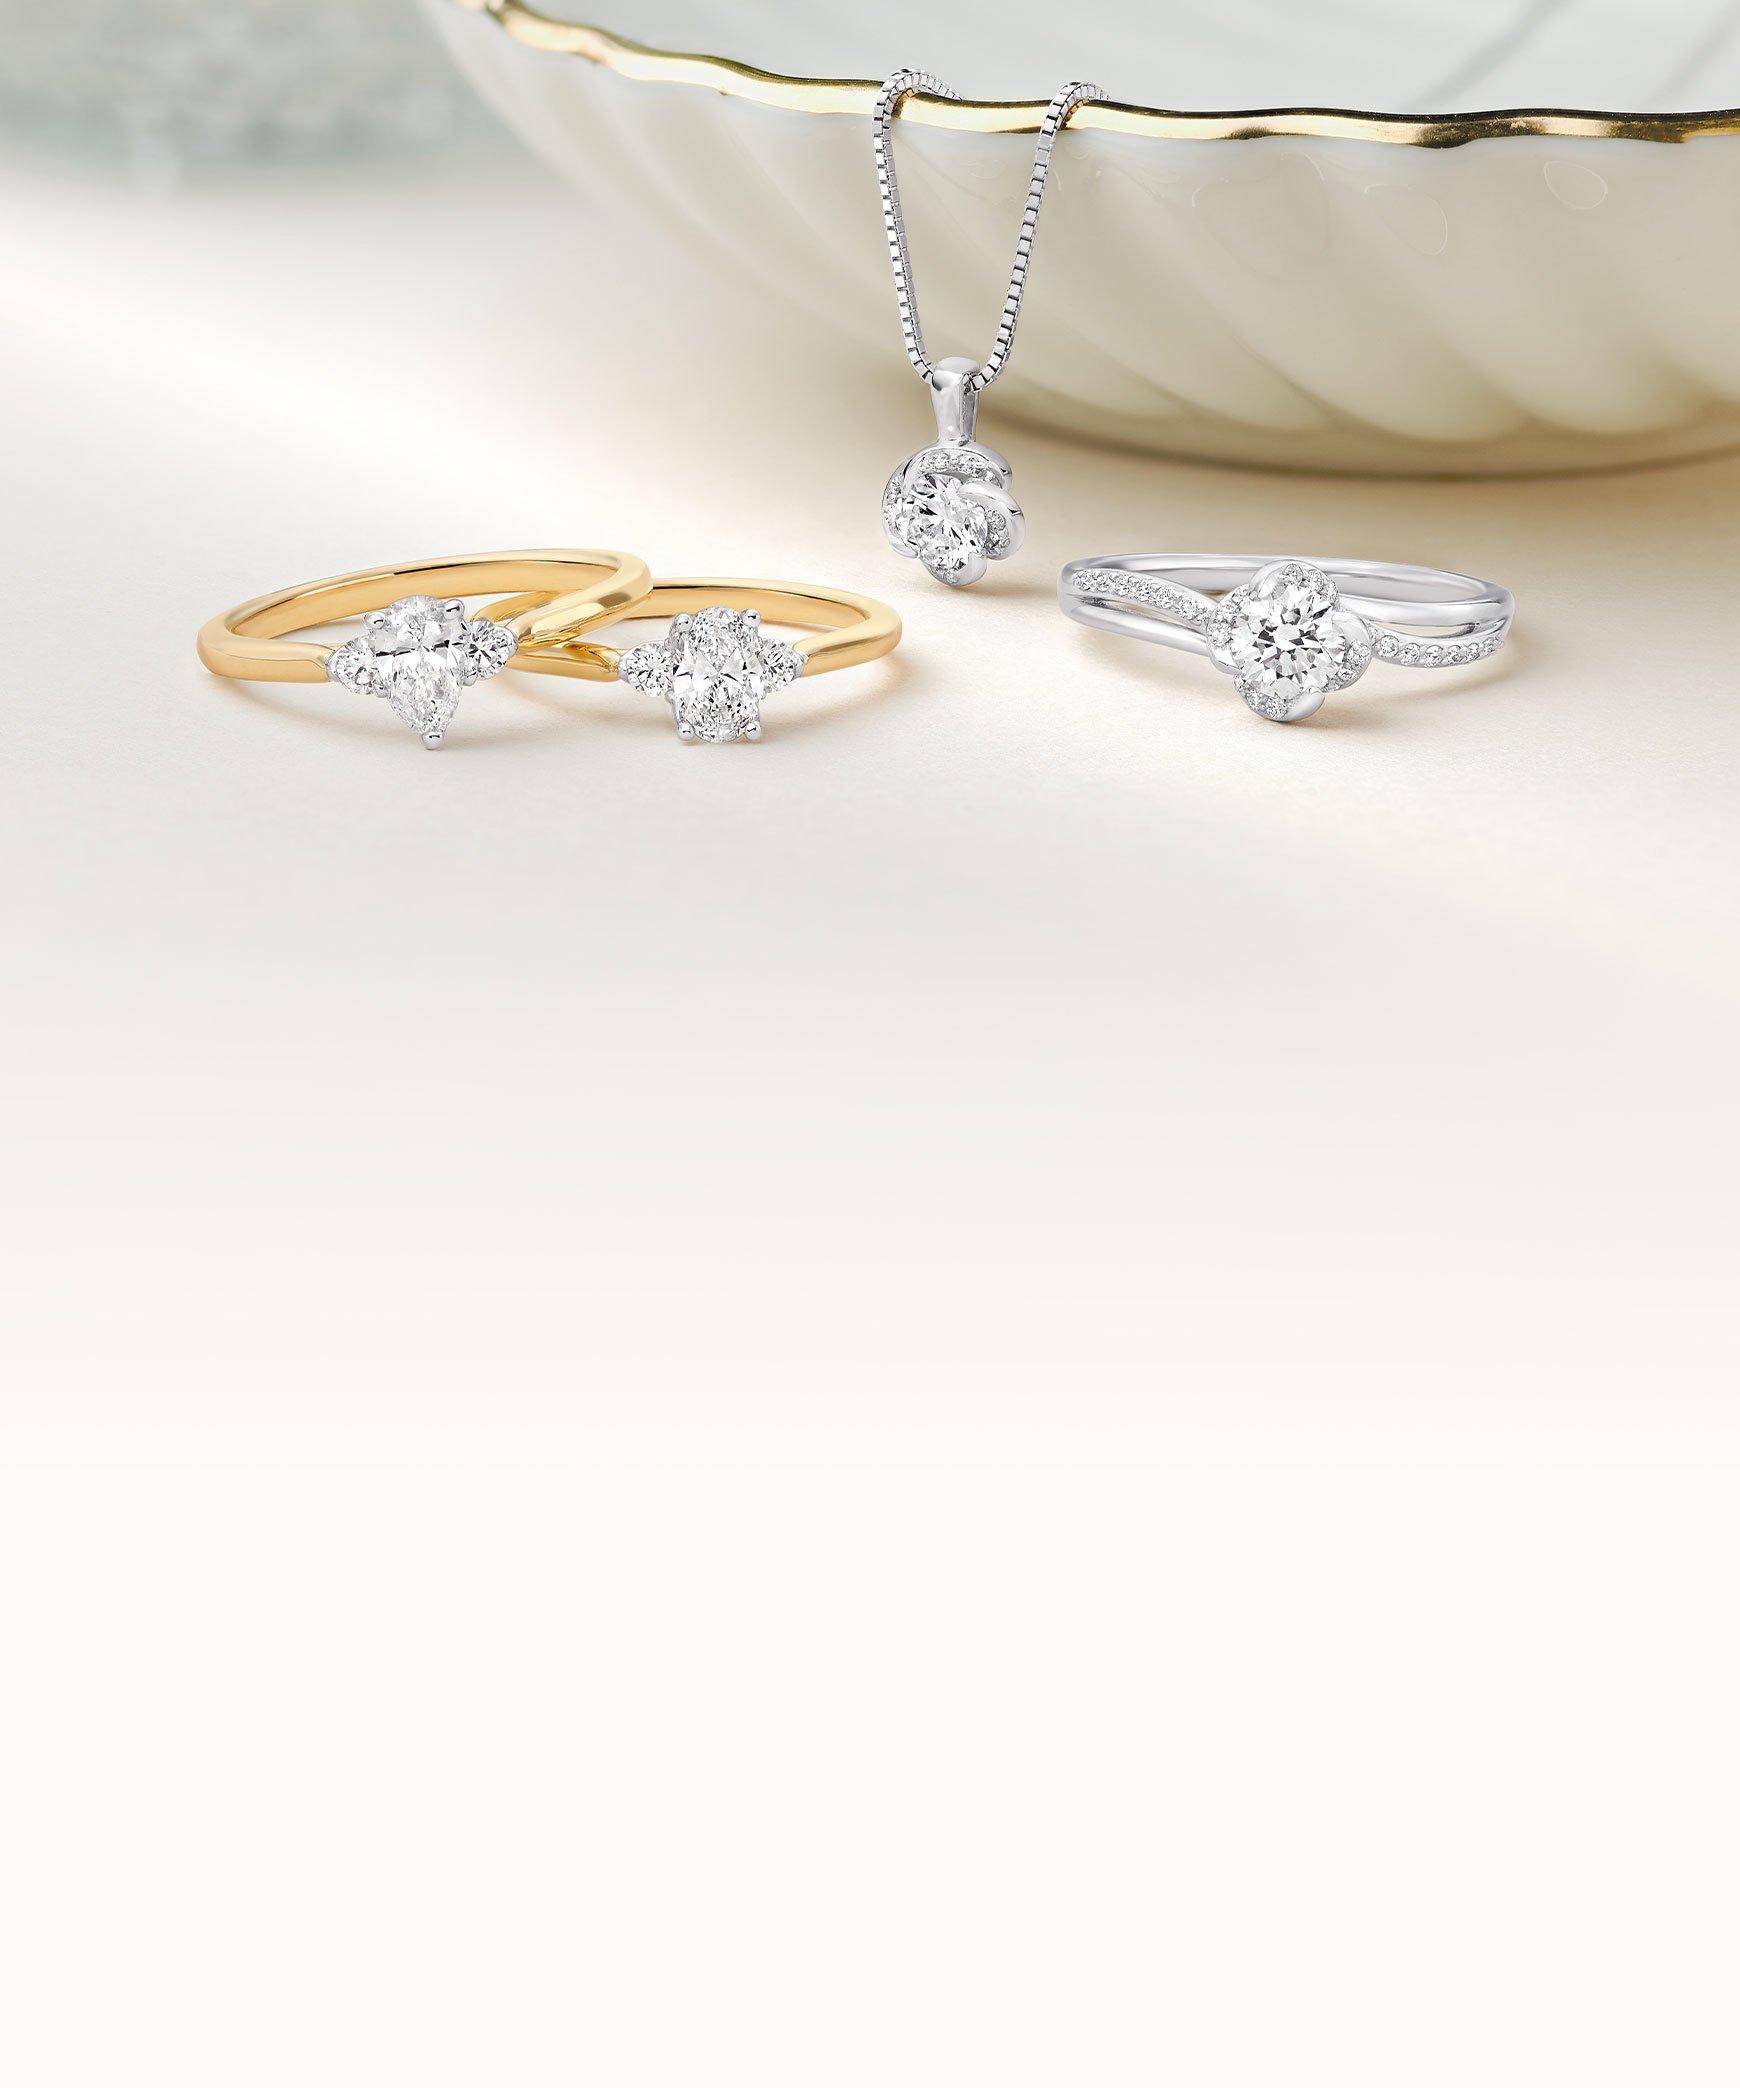 White gold diamond rings from the Maple Leaf 'Wind's Embrace' collection.